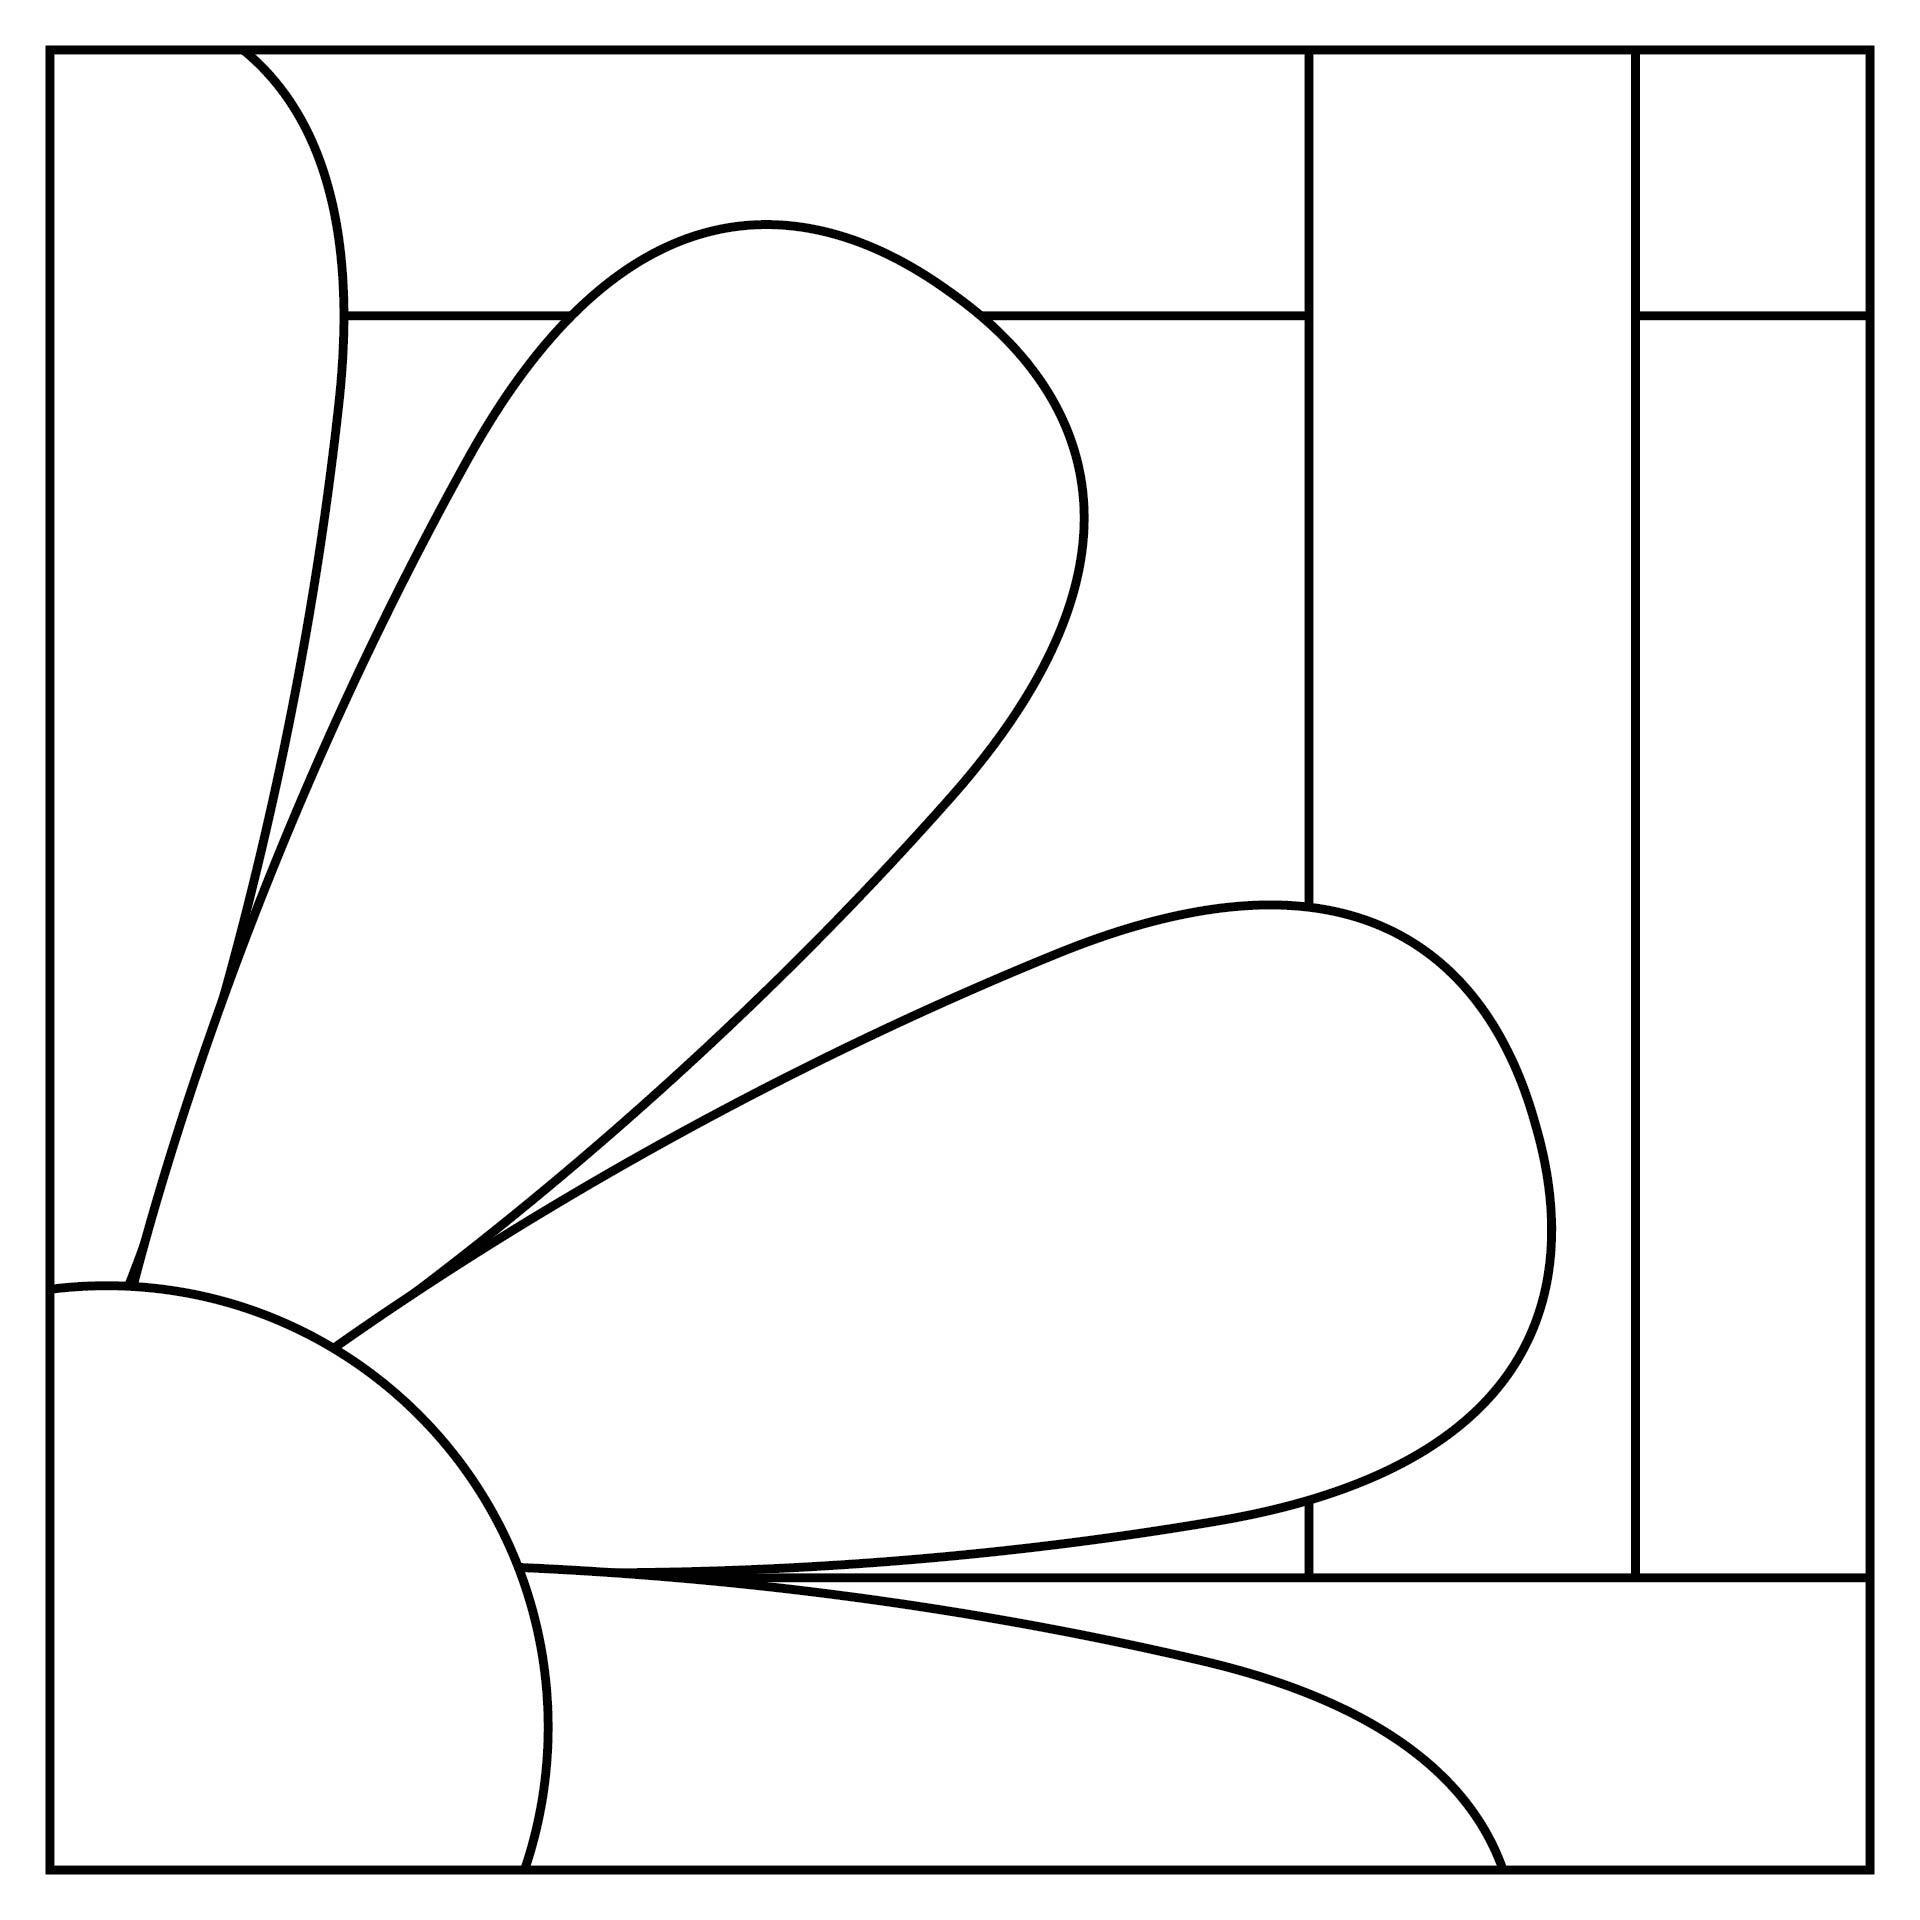 5-best-images-of-beginner-stained-glass-patterns-printable-simple